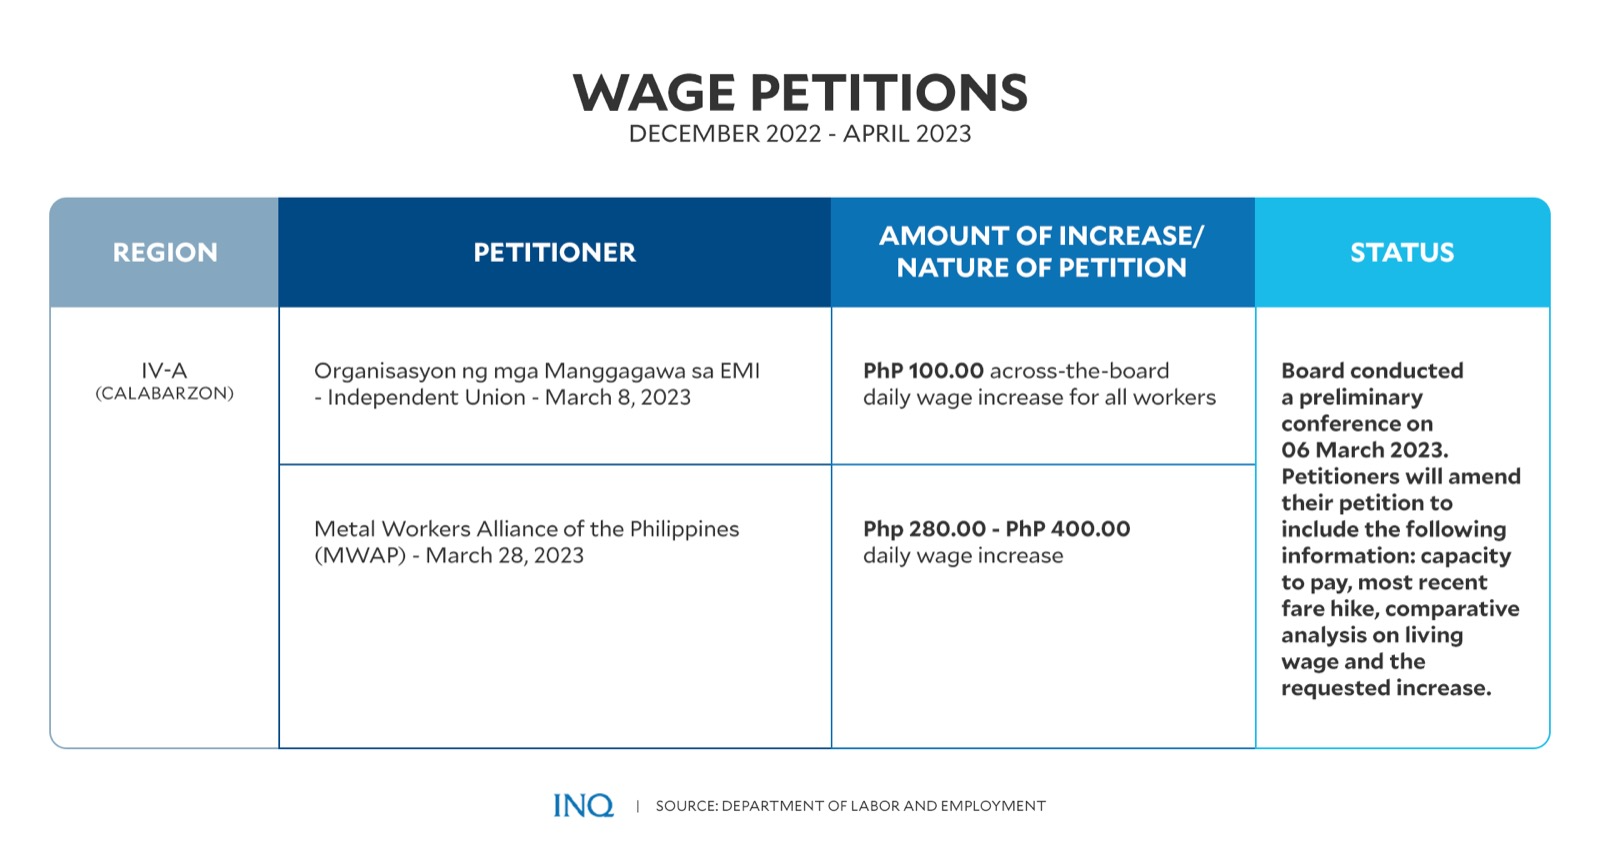 Wage boards still processing 9 wage hike petitions - DOLE